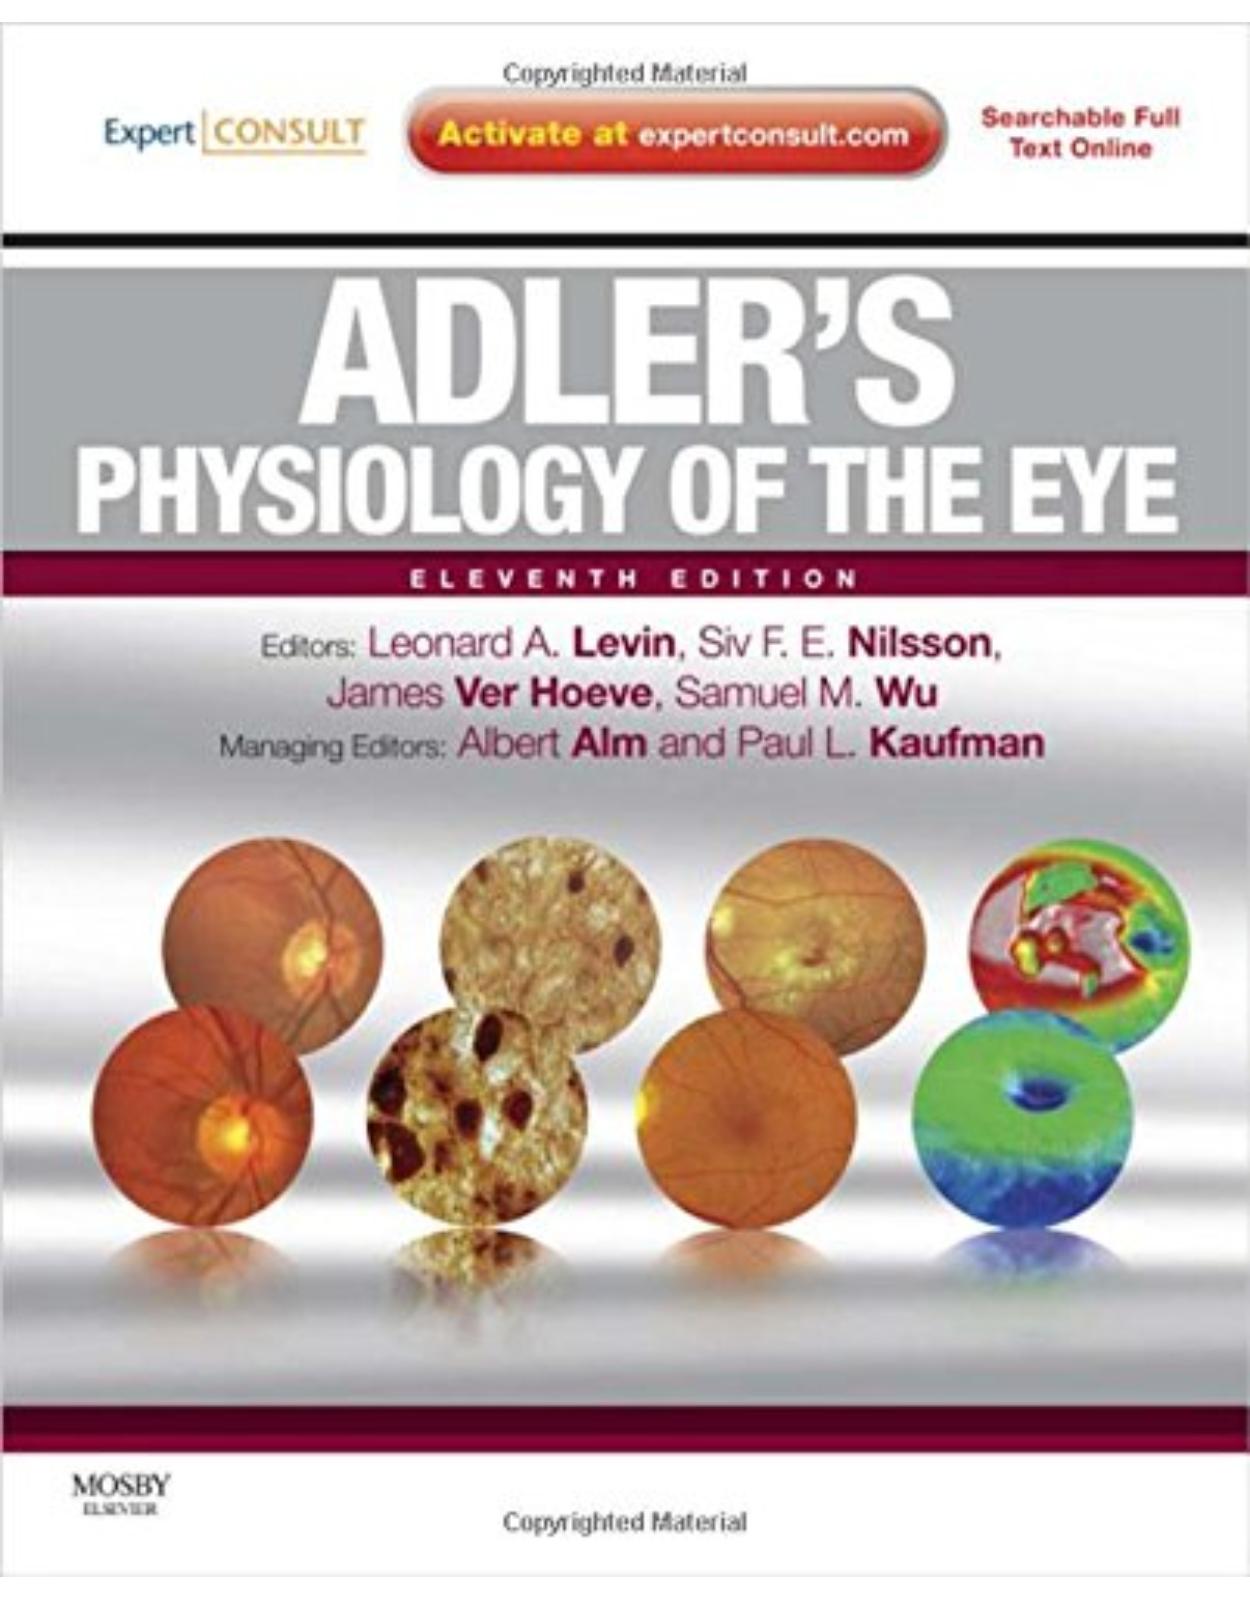 Adler's Physiology of the Eye: Expert Consult - Online and Print 11e